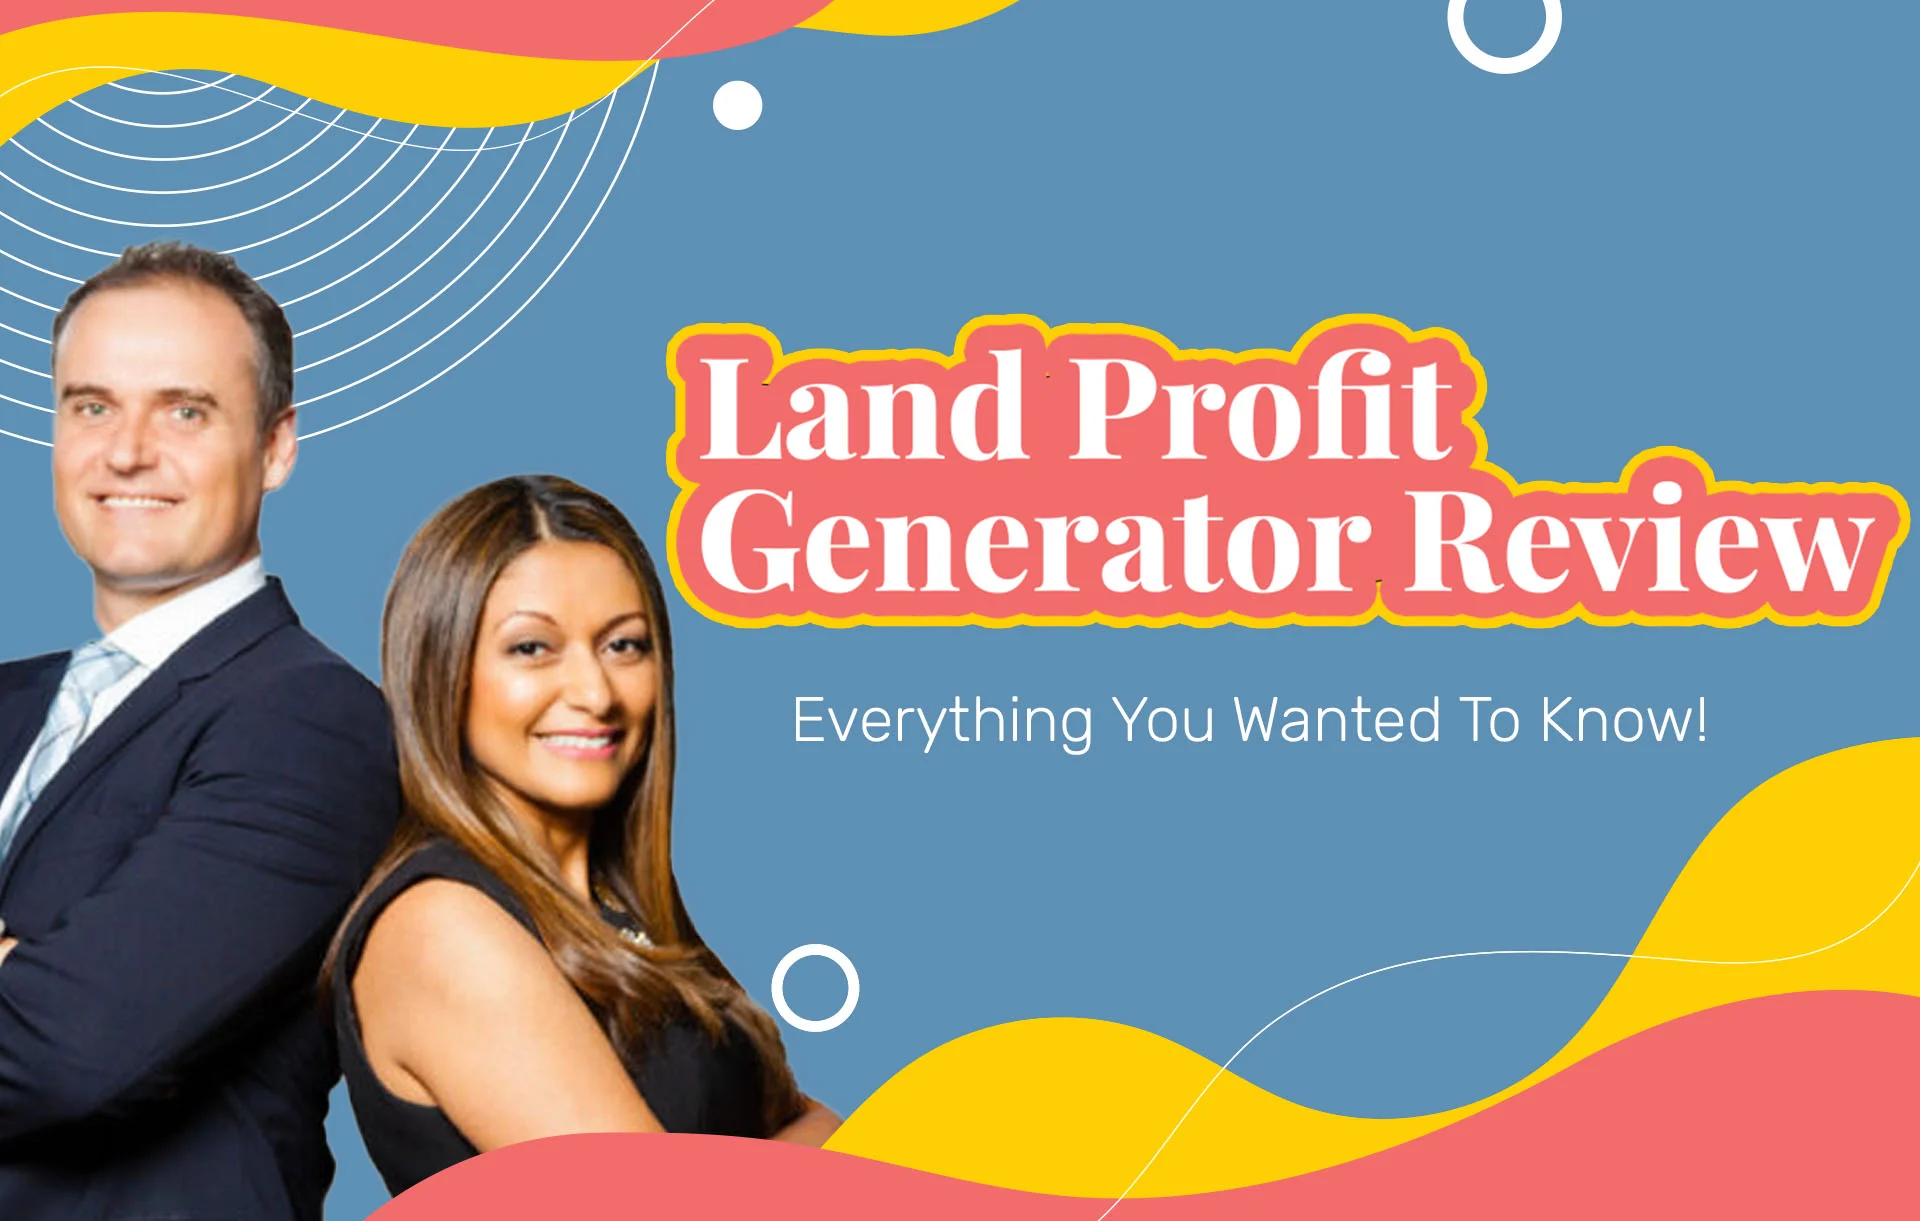 Land Profit Generator Reviews: Everything You Wanted To Know!